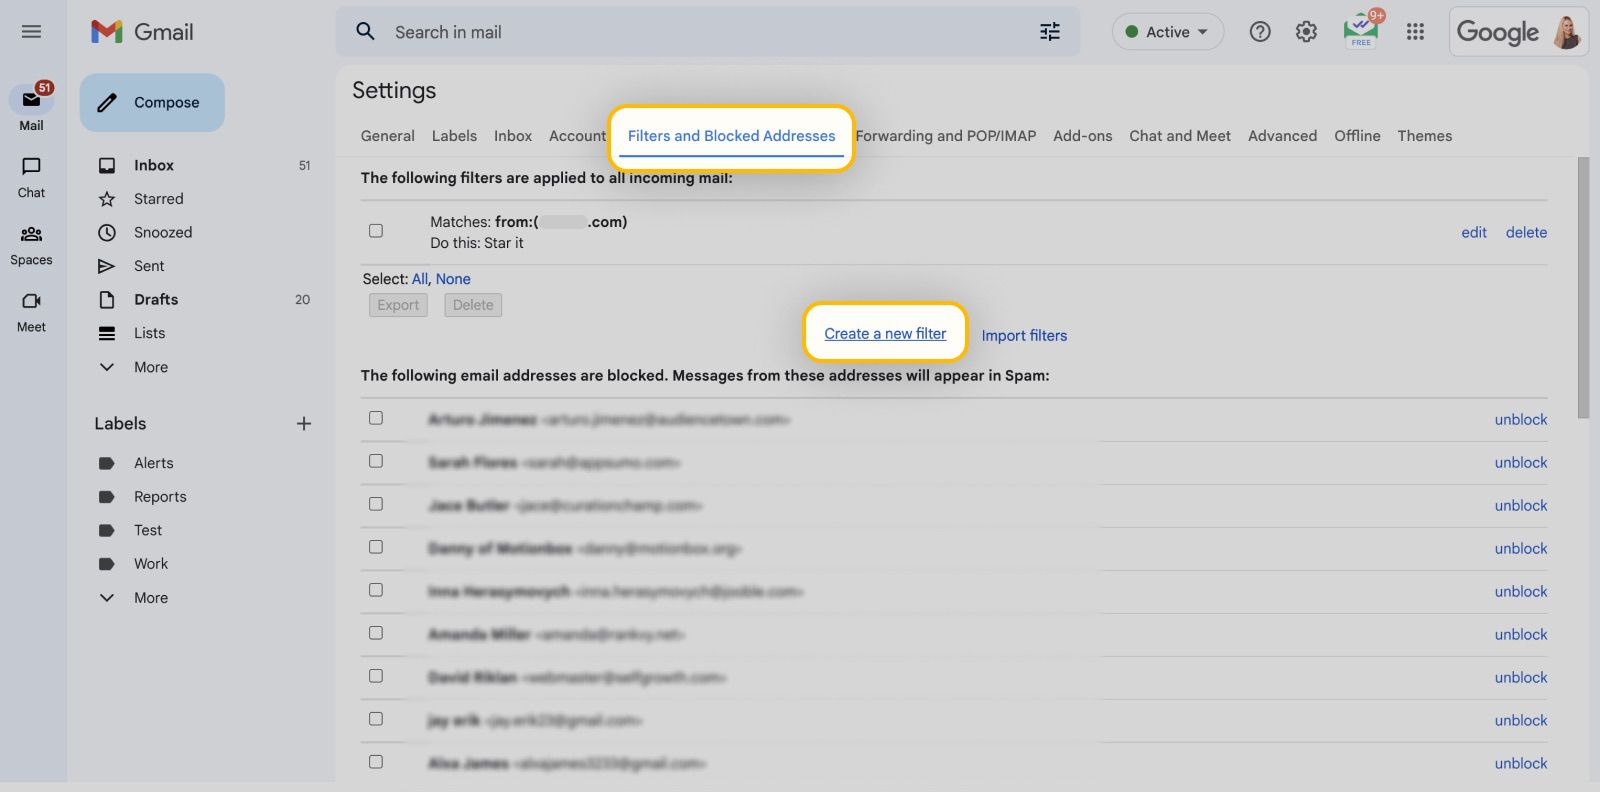 How To Block Someone On Gmail Full Guide On Blocking Emails 6576